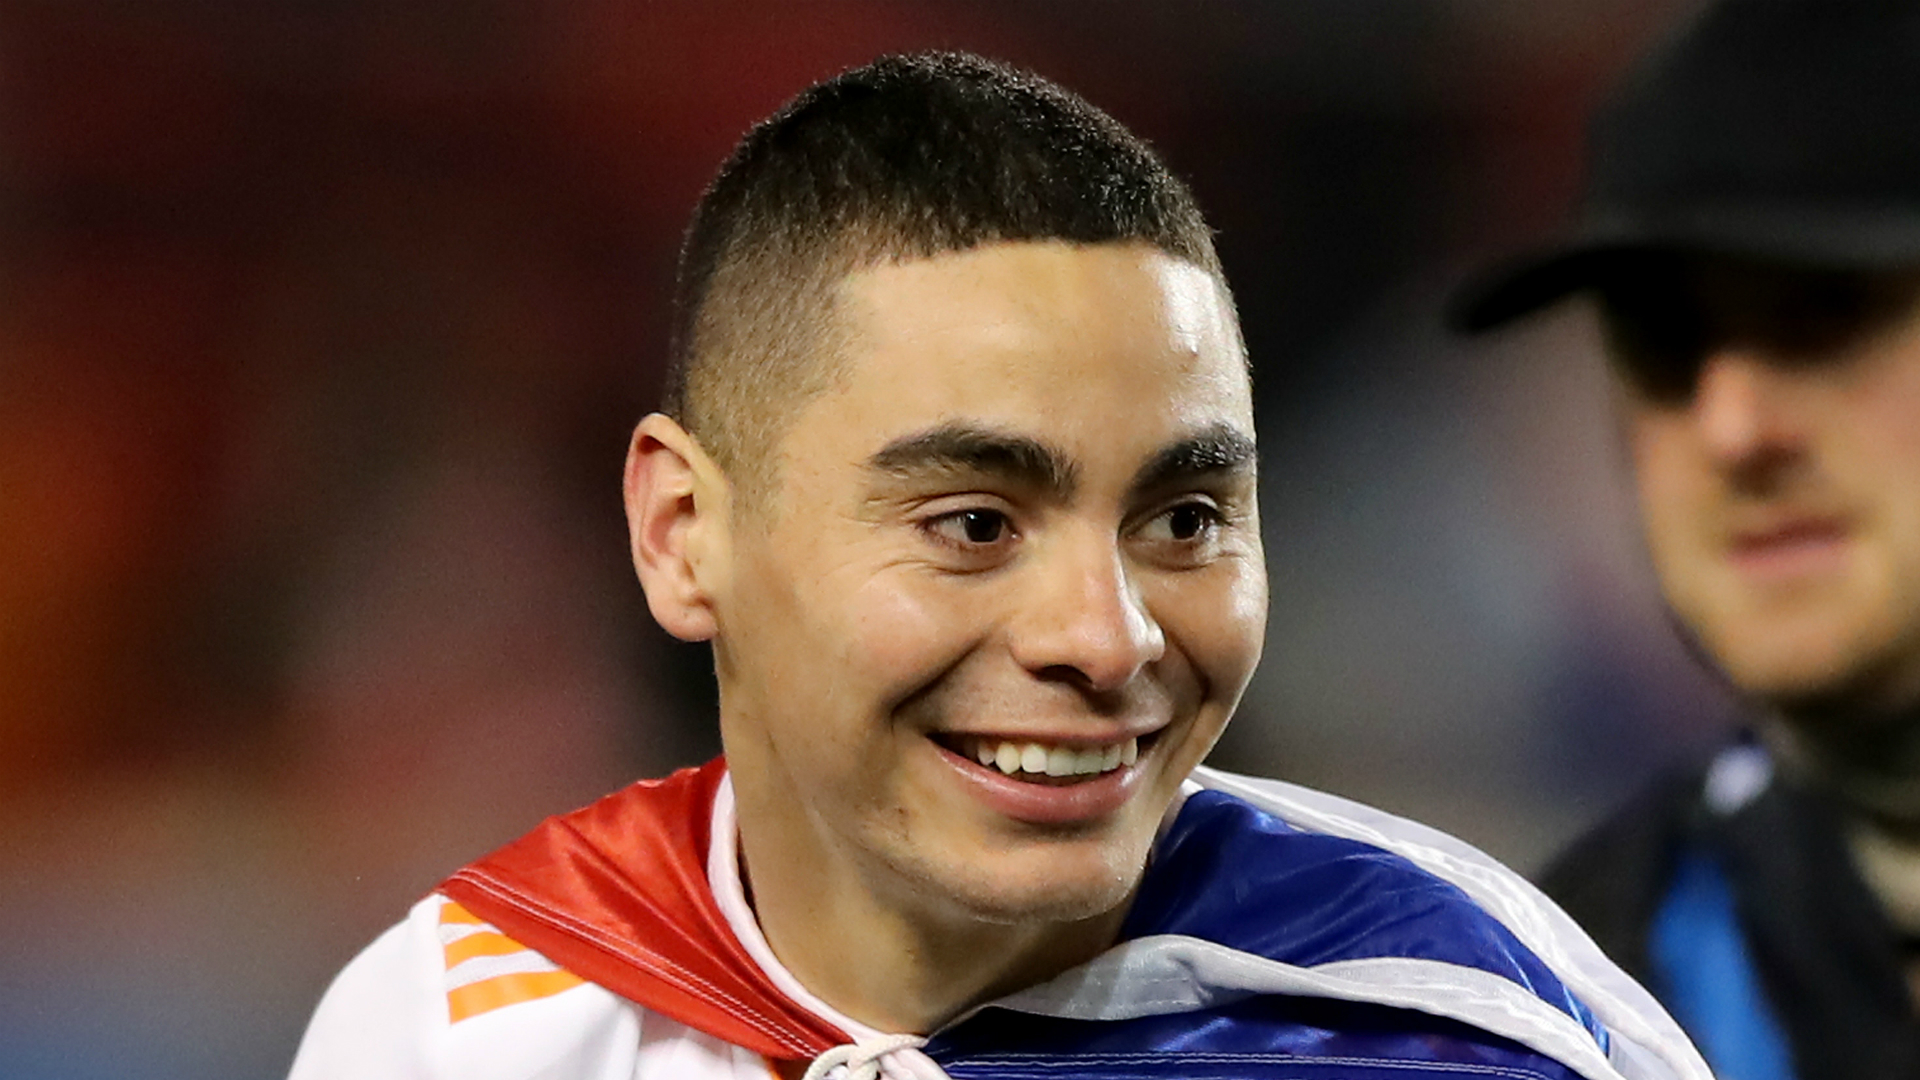 Miguel Almiron is among the biggest stars in MLS, but Rafael Benitez has denied Newcastle United have made a bid for the midfielder.